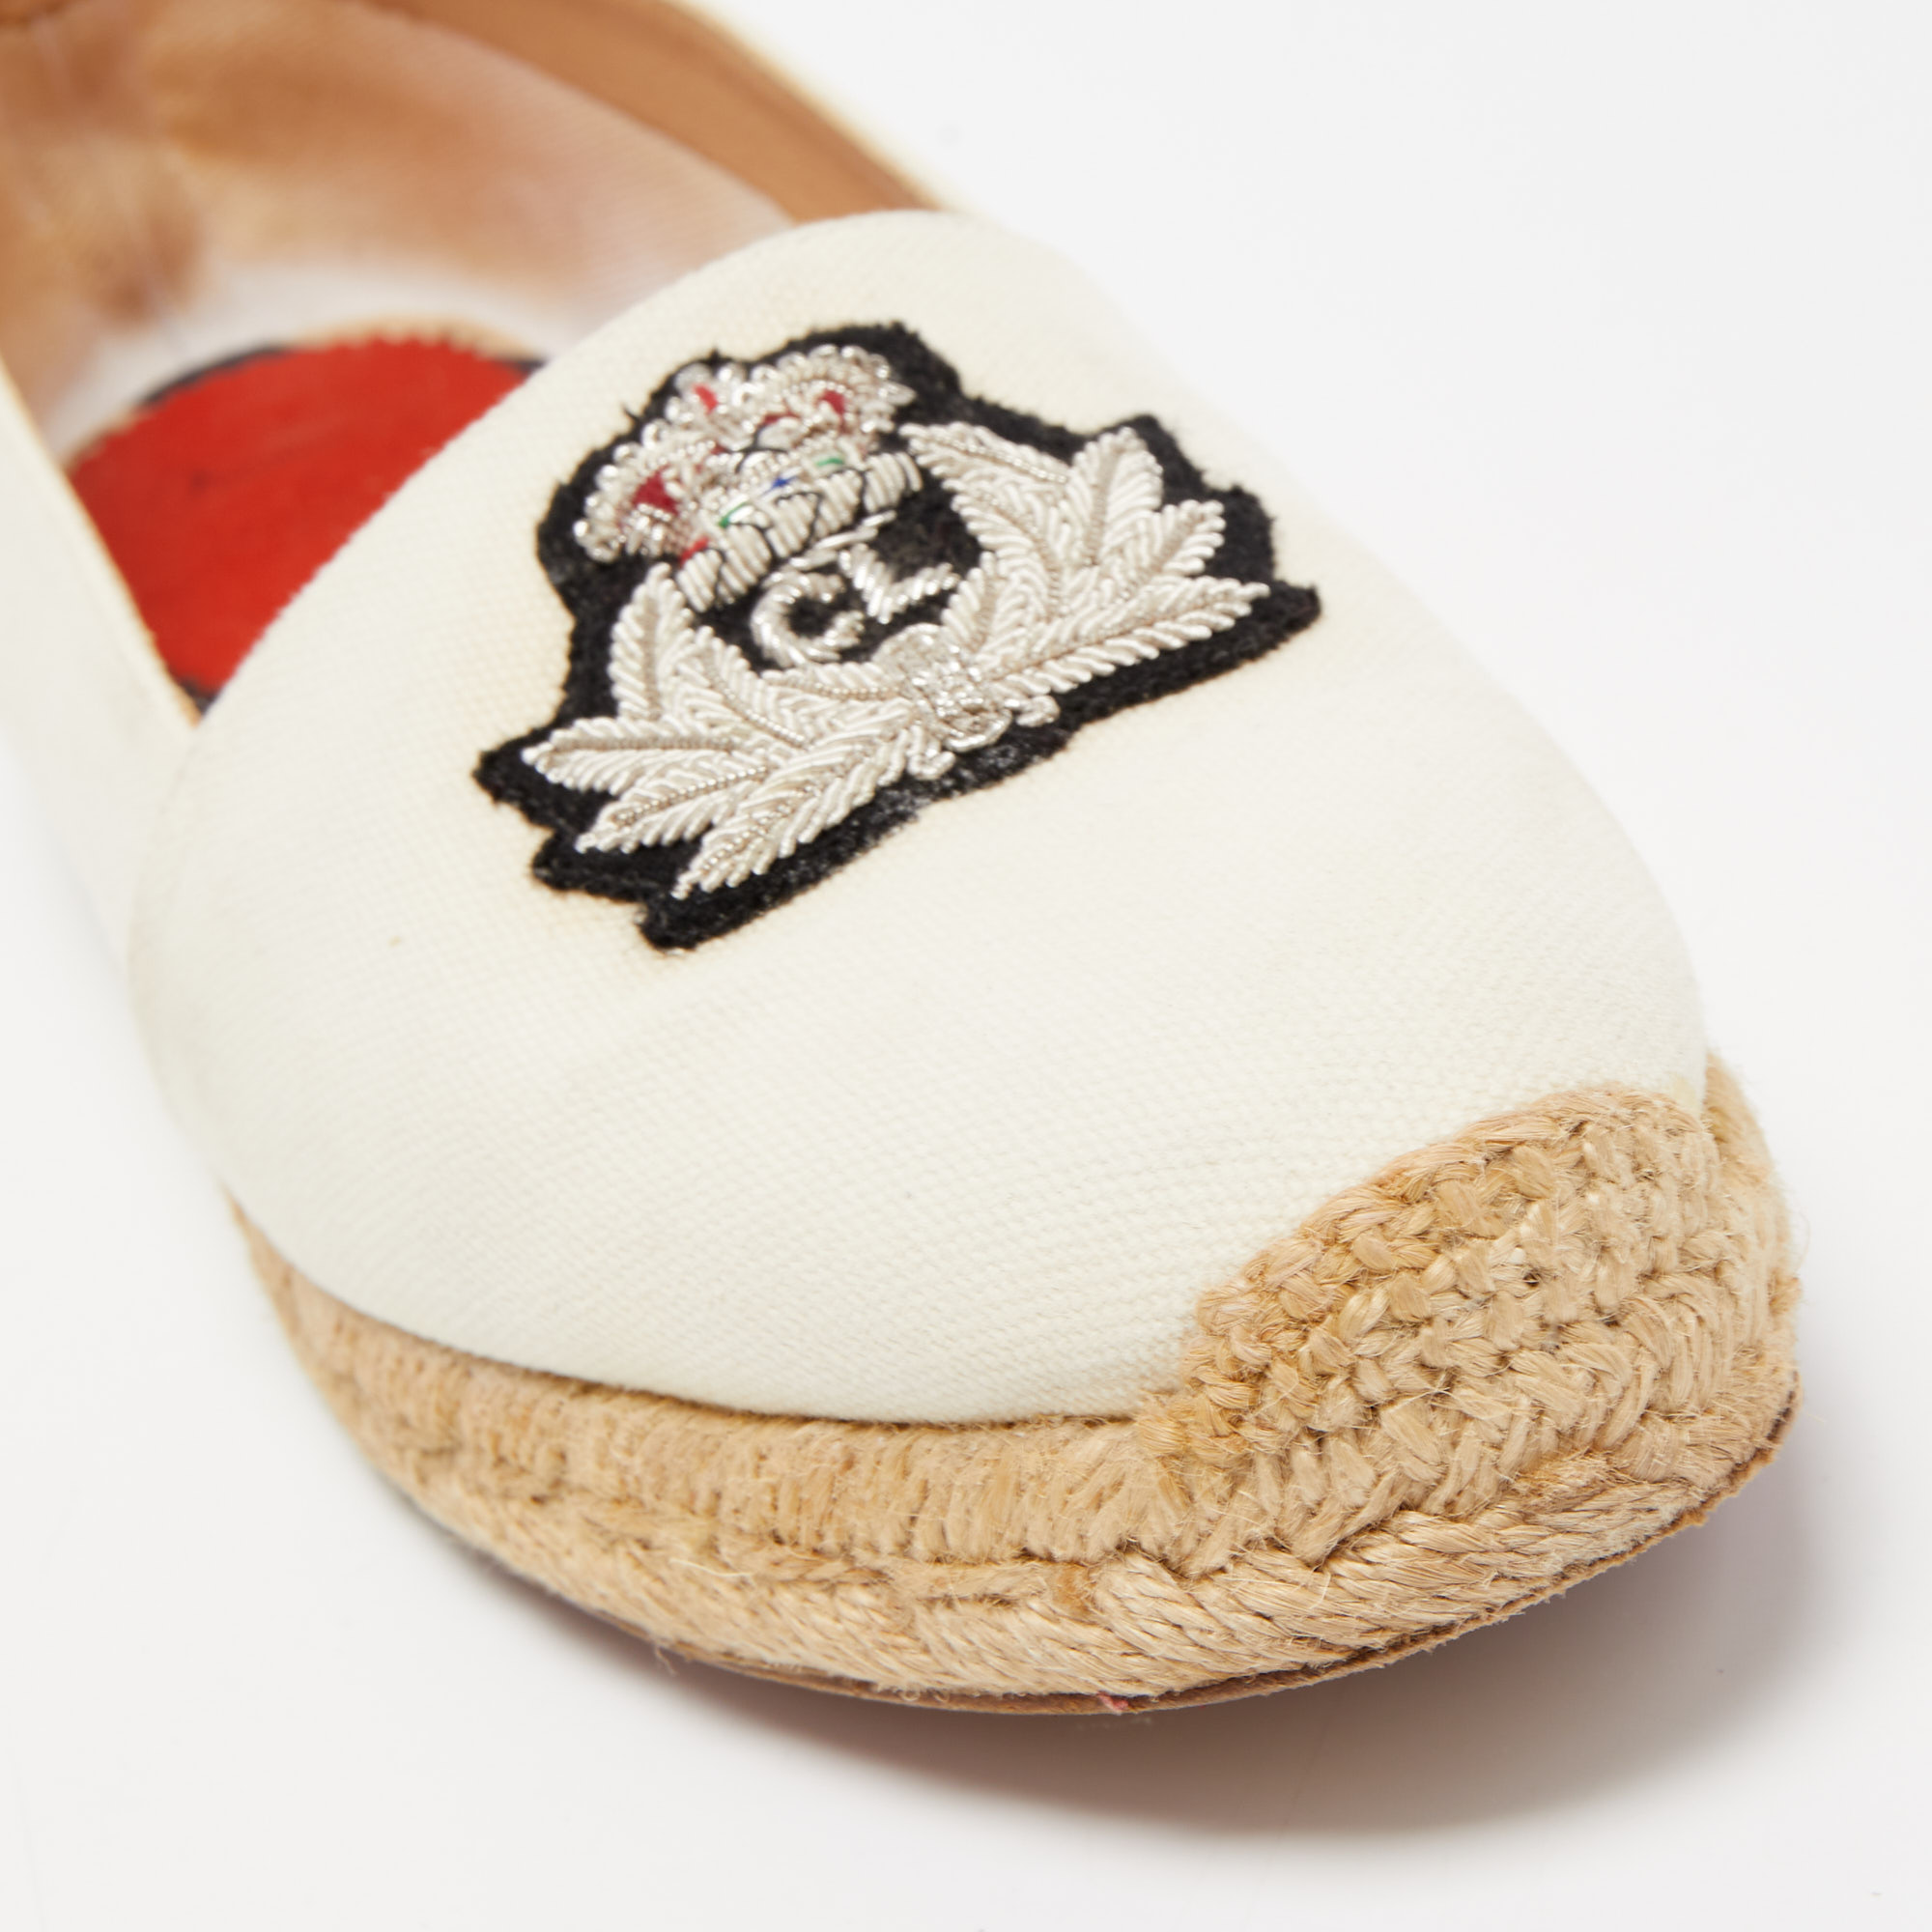 Christian Louboutin Off White Canvas Gala Embroidered Crest Espadrille Flats Size 36